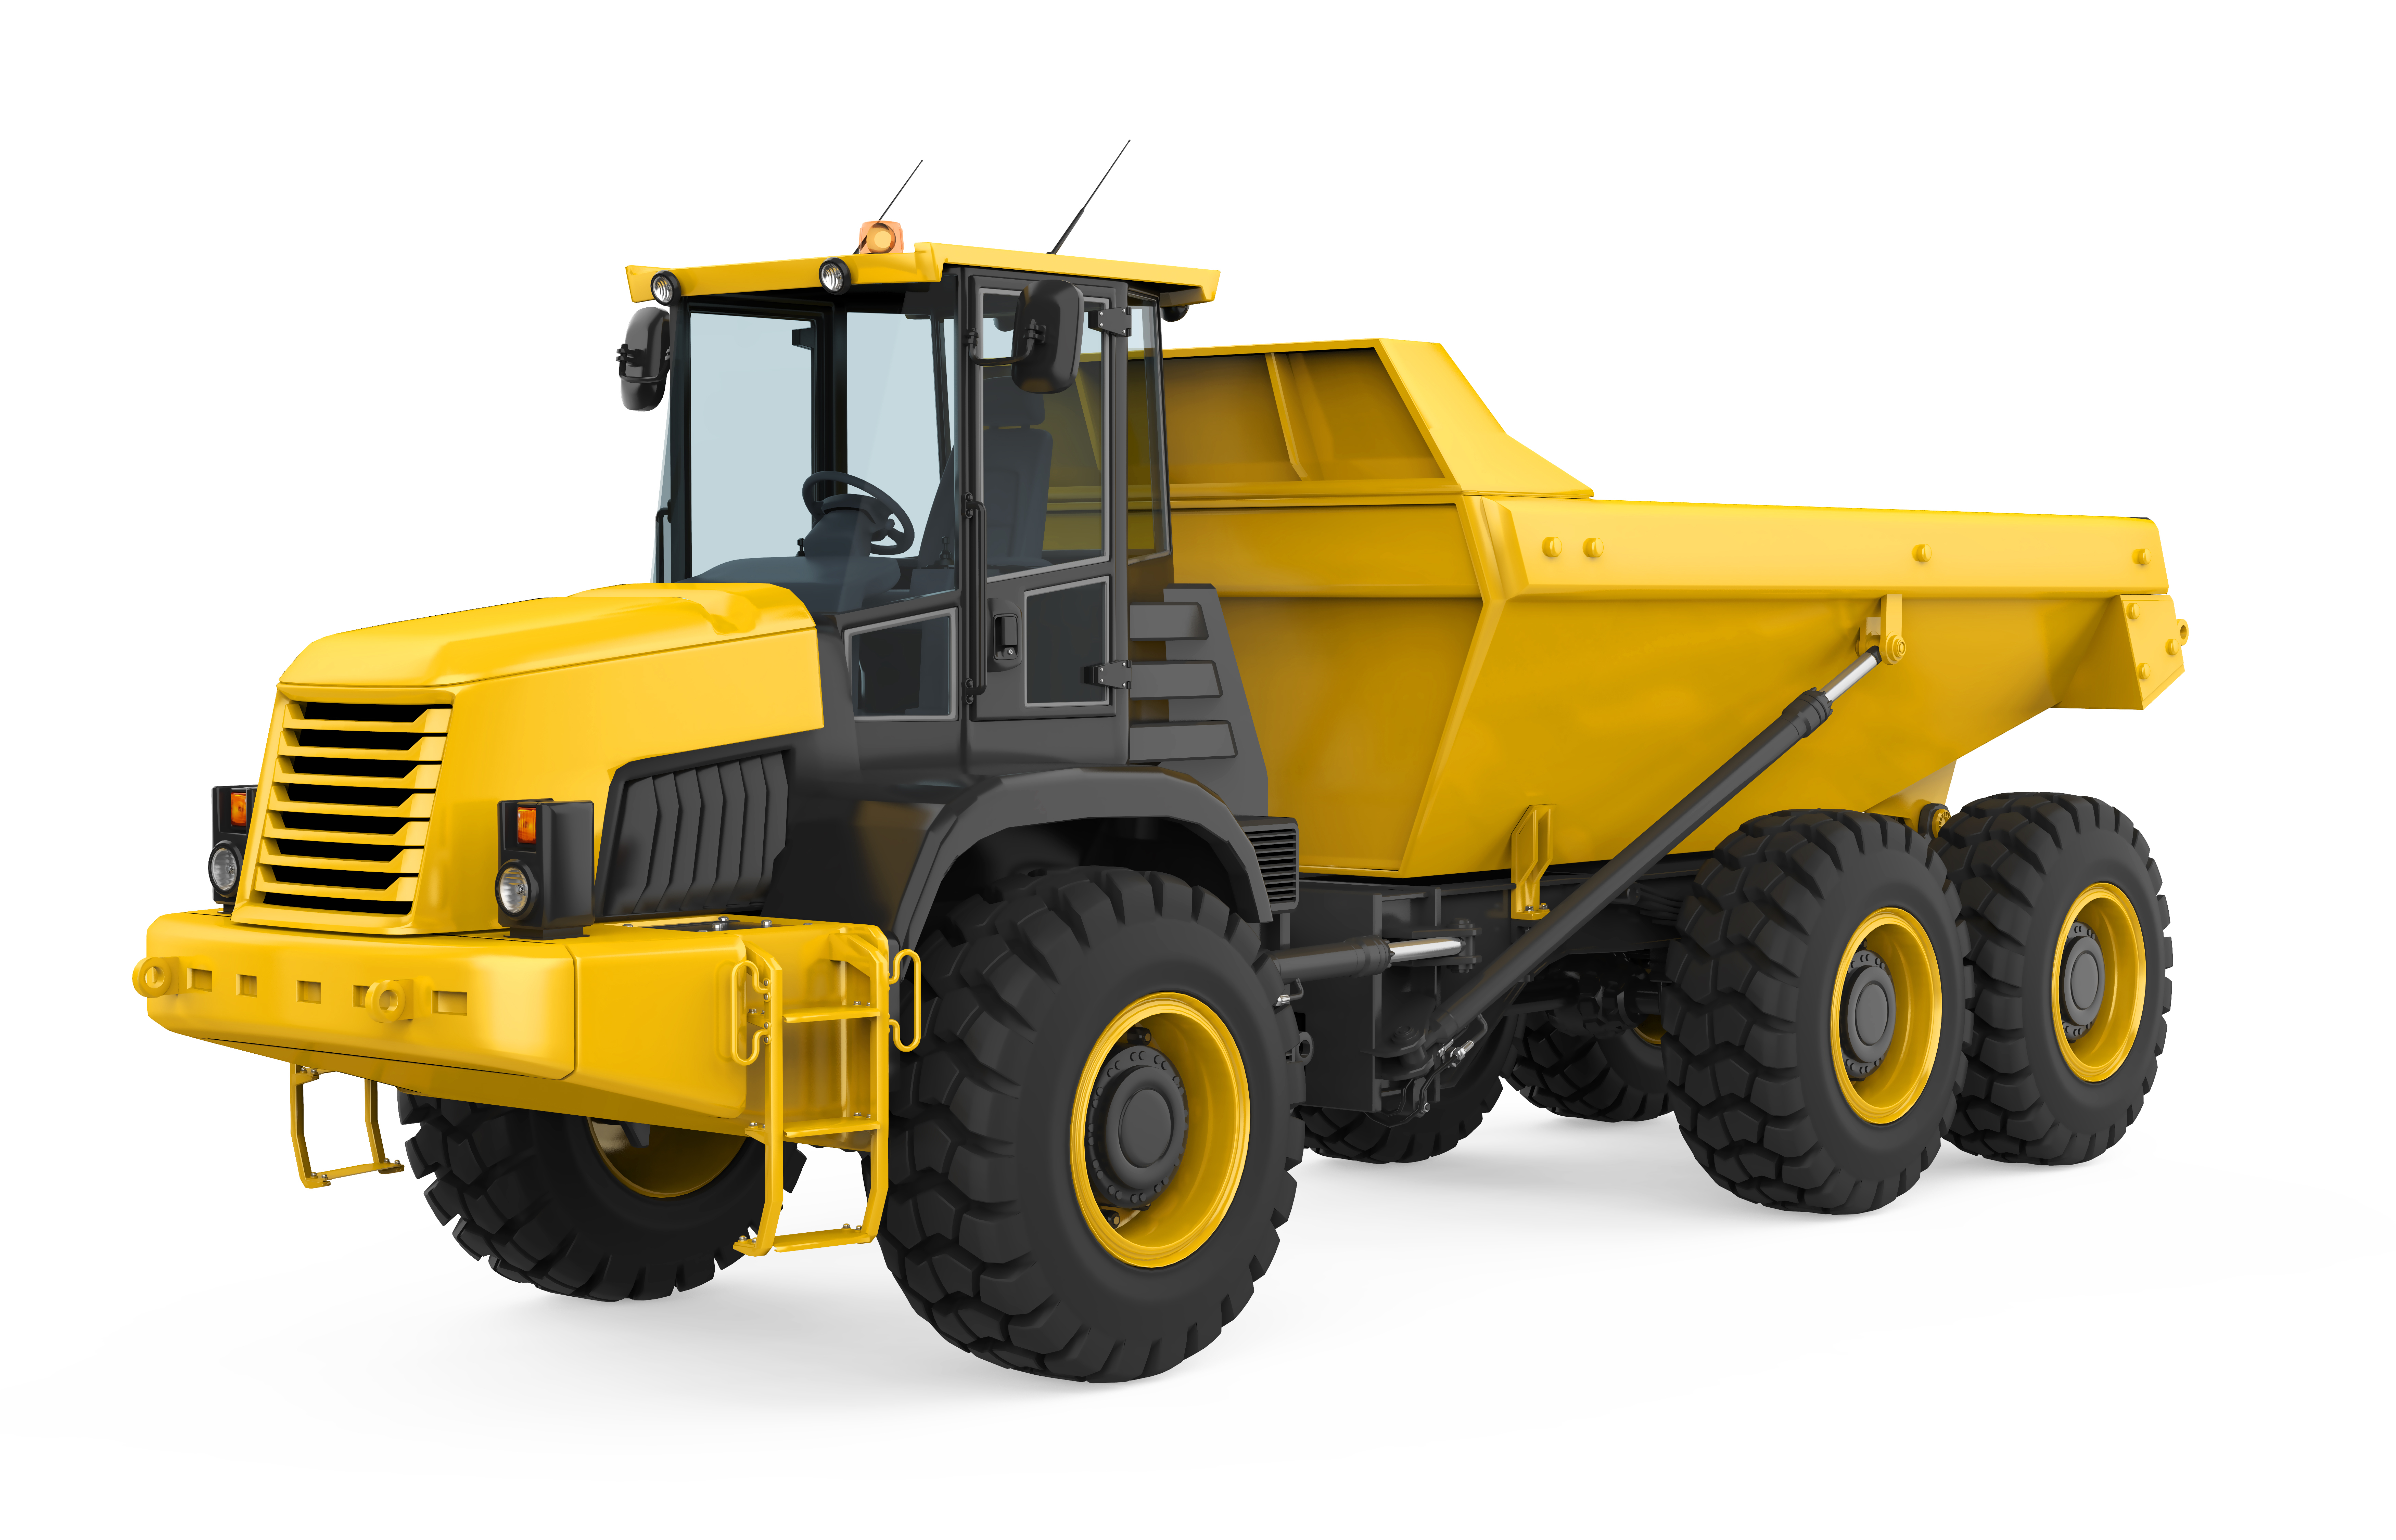 CPCS A56 - Dump Truck – Articulated Chassis - GRANT FUNDED